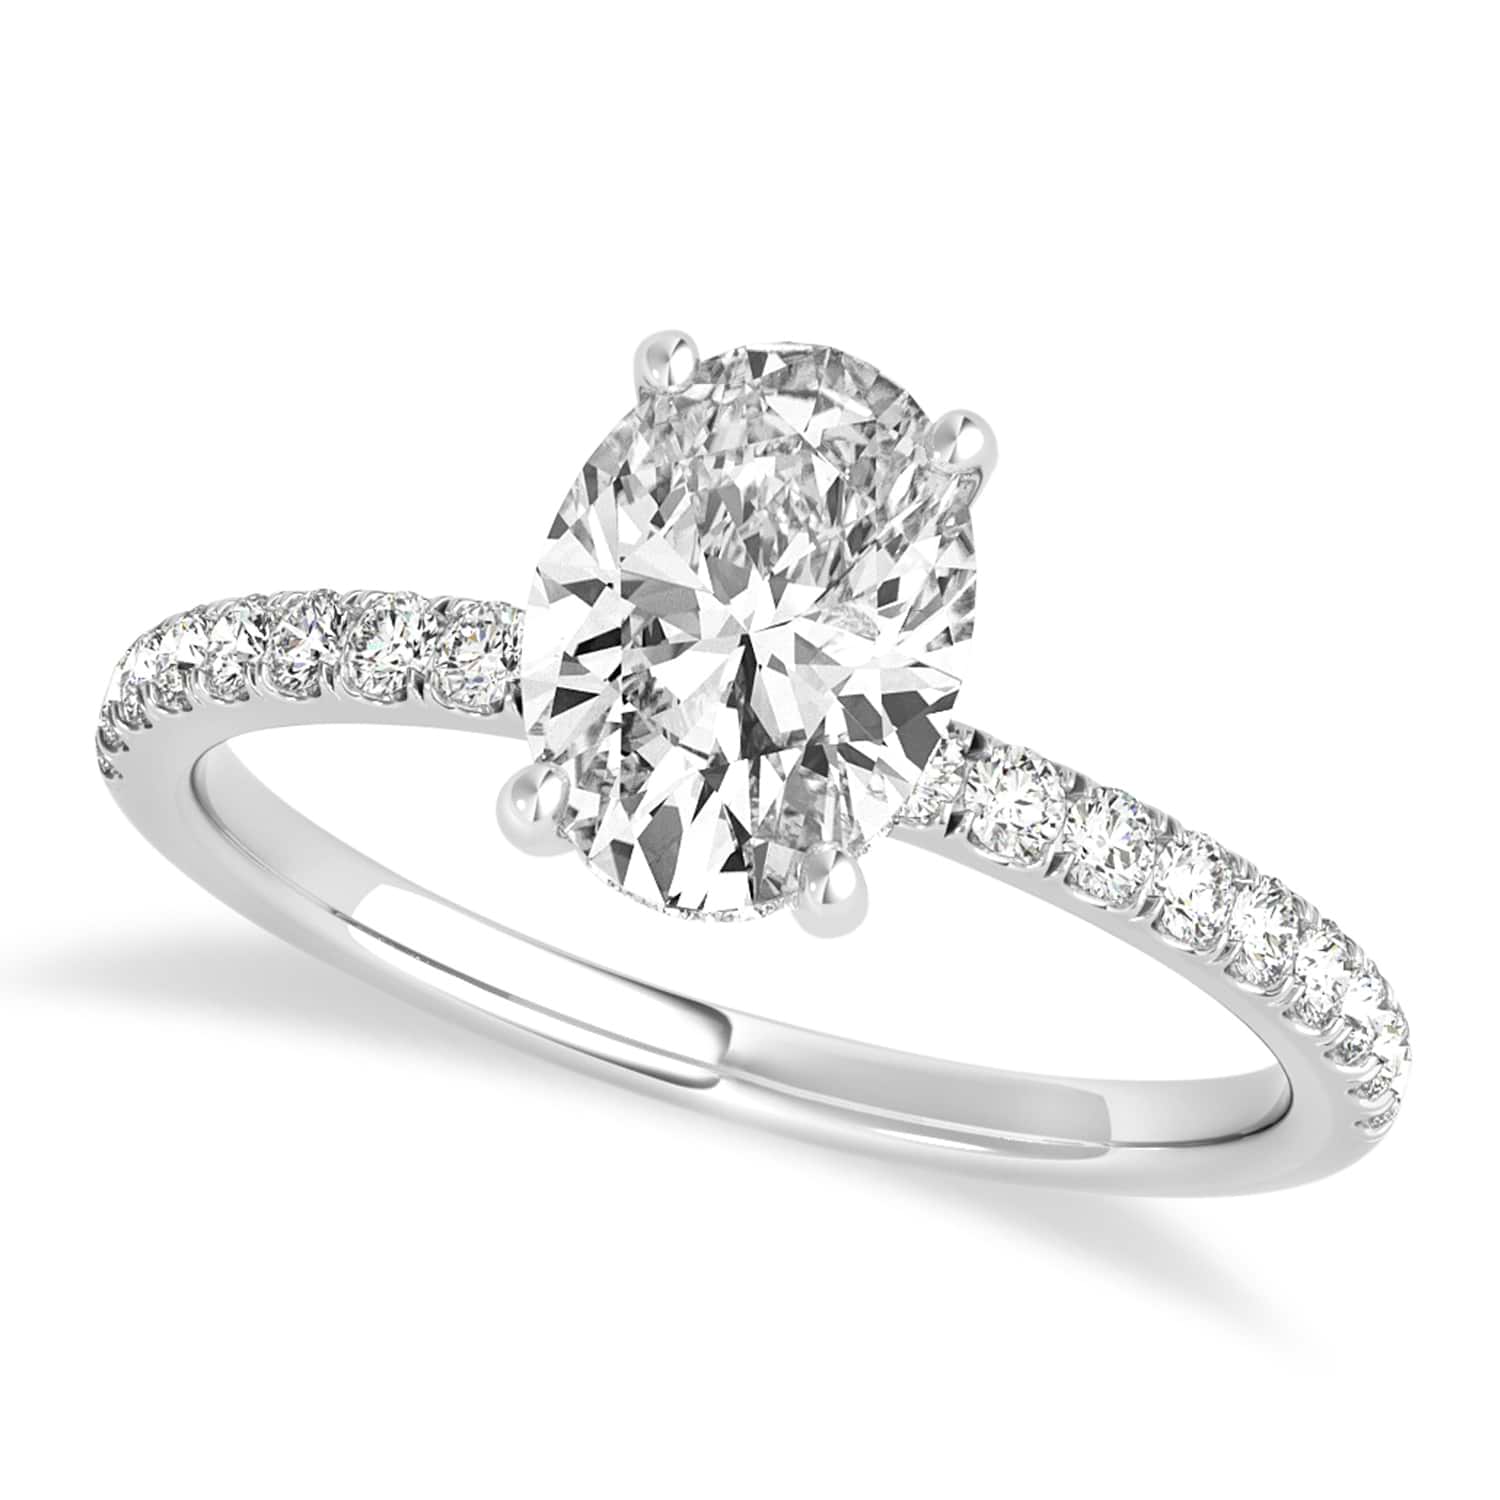 Oval Lab Grown Diamond Single Row Hidden Halo Engagement Ring 18k White Gold (0.68ct)